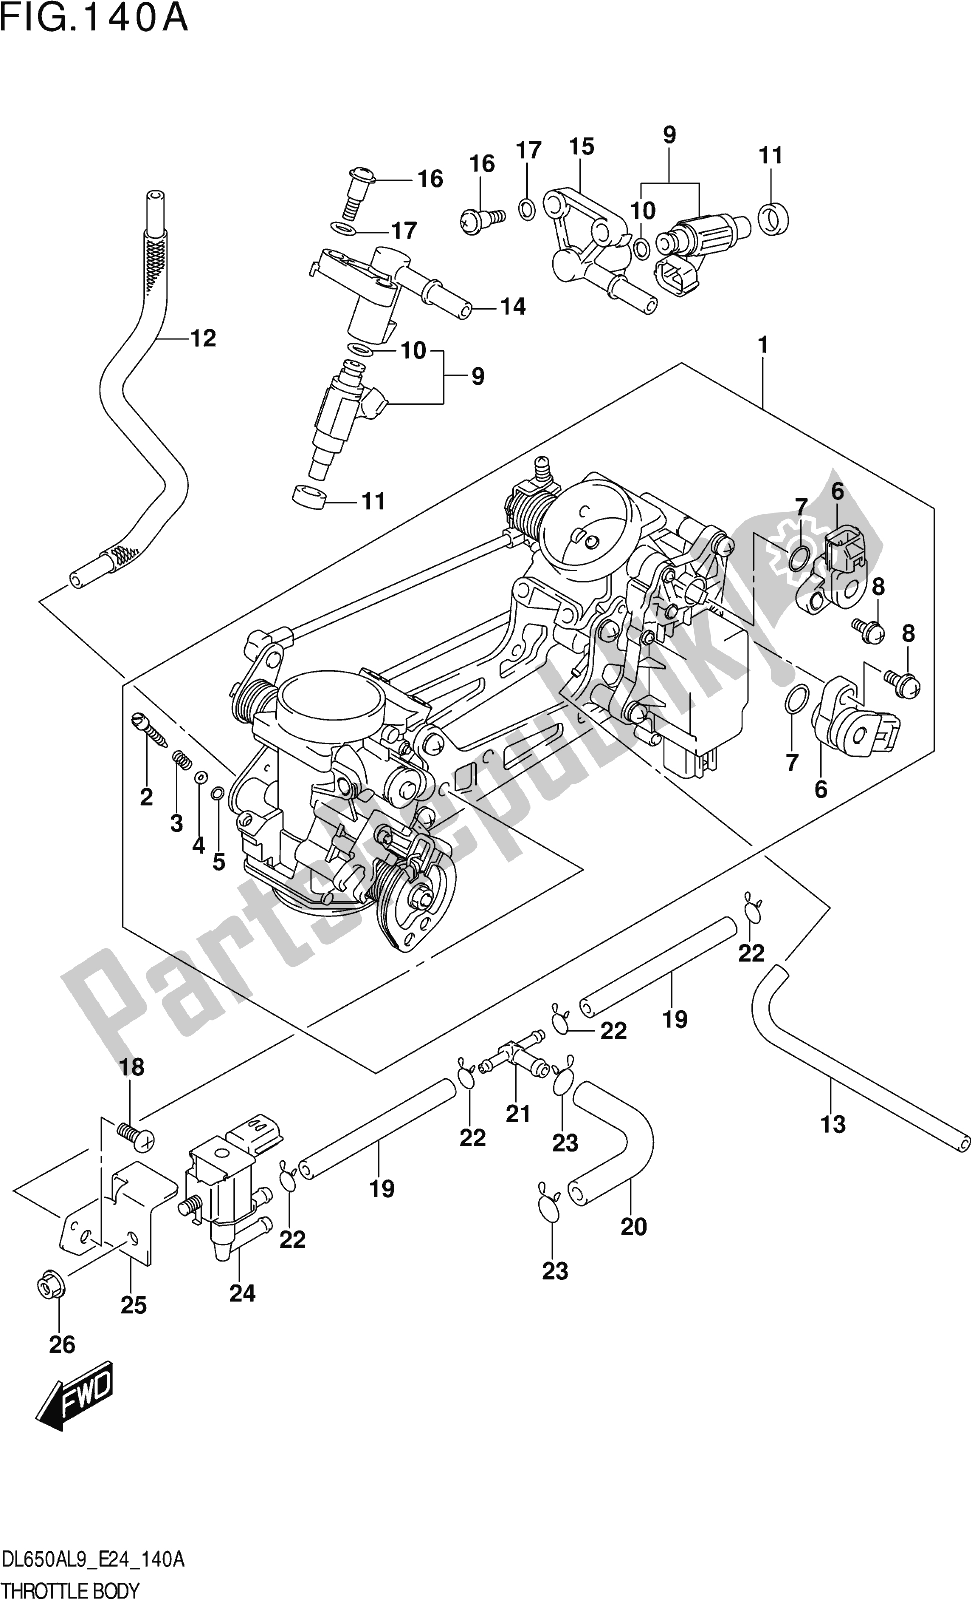 All parts for the Fig. 140a Throttle Body of the Suzuki DL 650A V Strom 2019